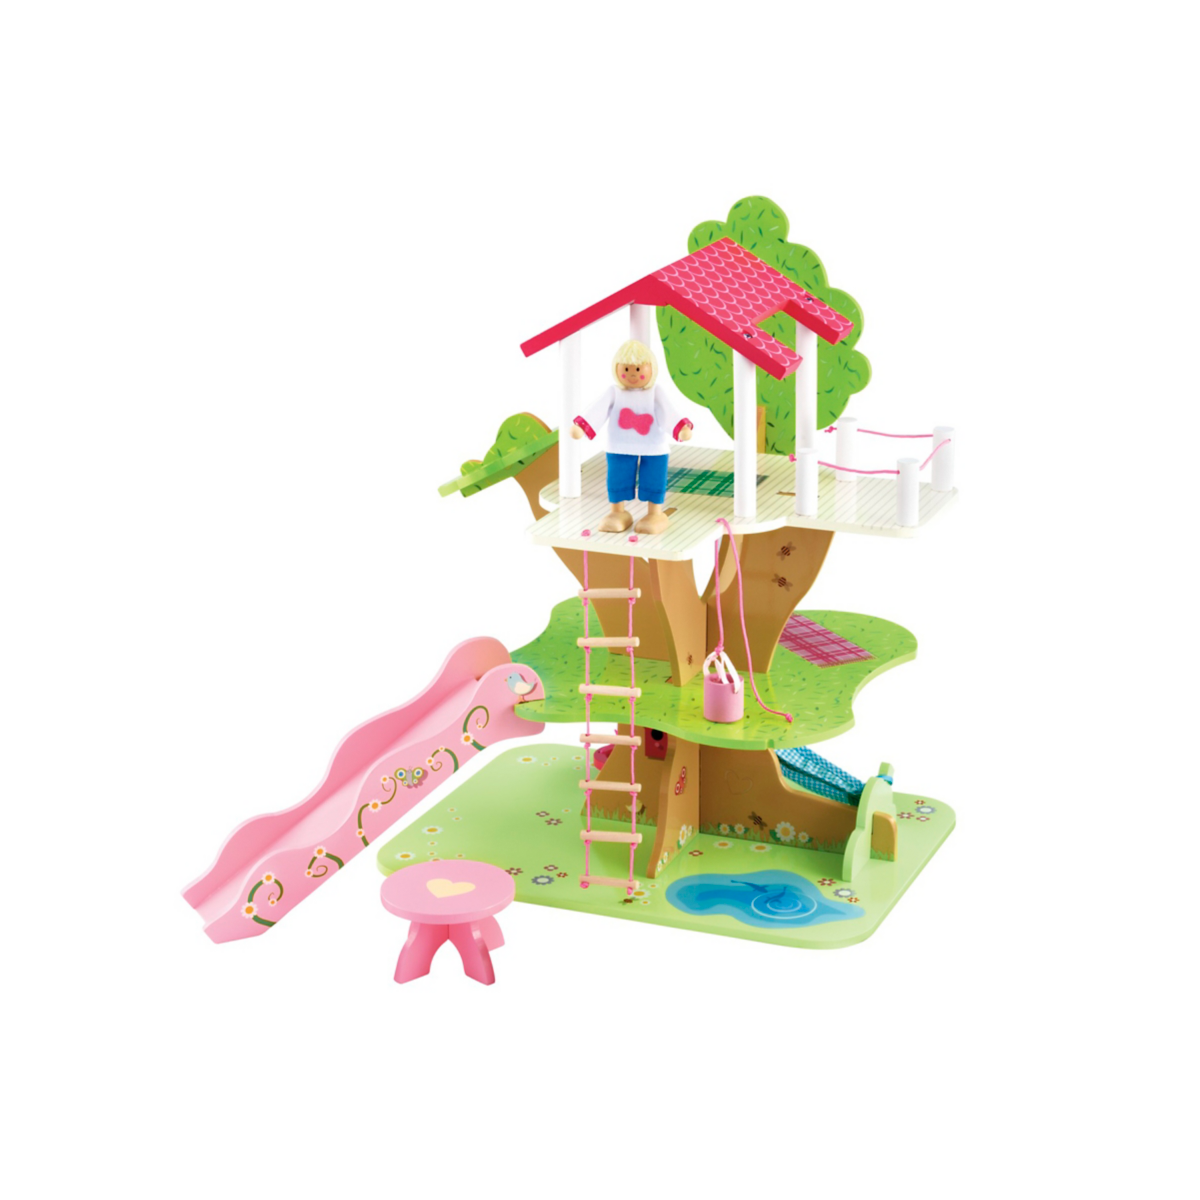 Rosebud Doll & Wooden Treehouse Playset | Early Learning Centre